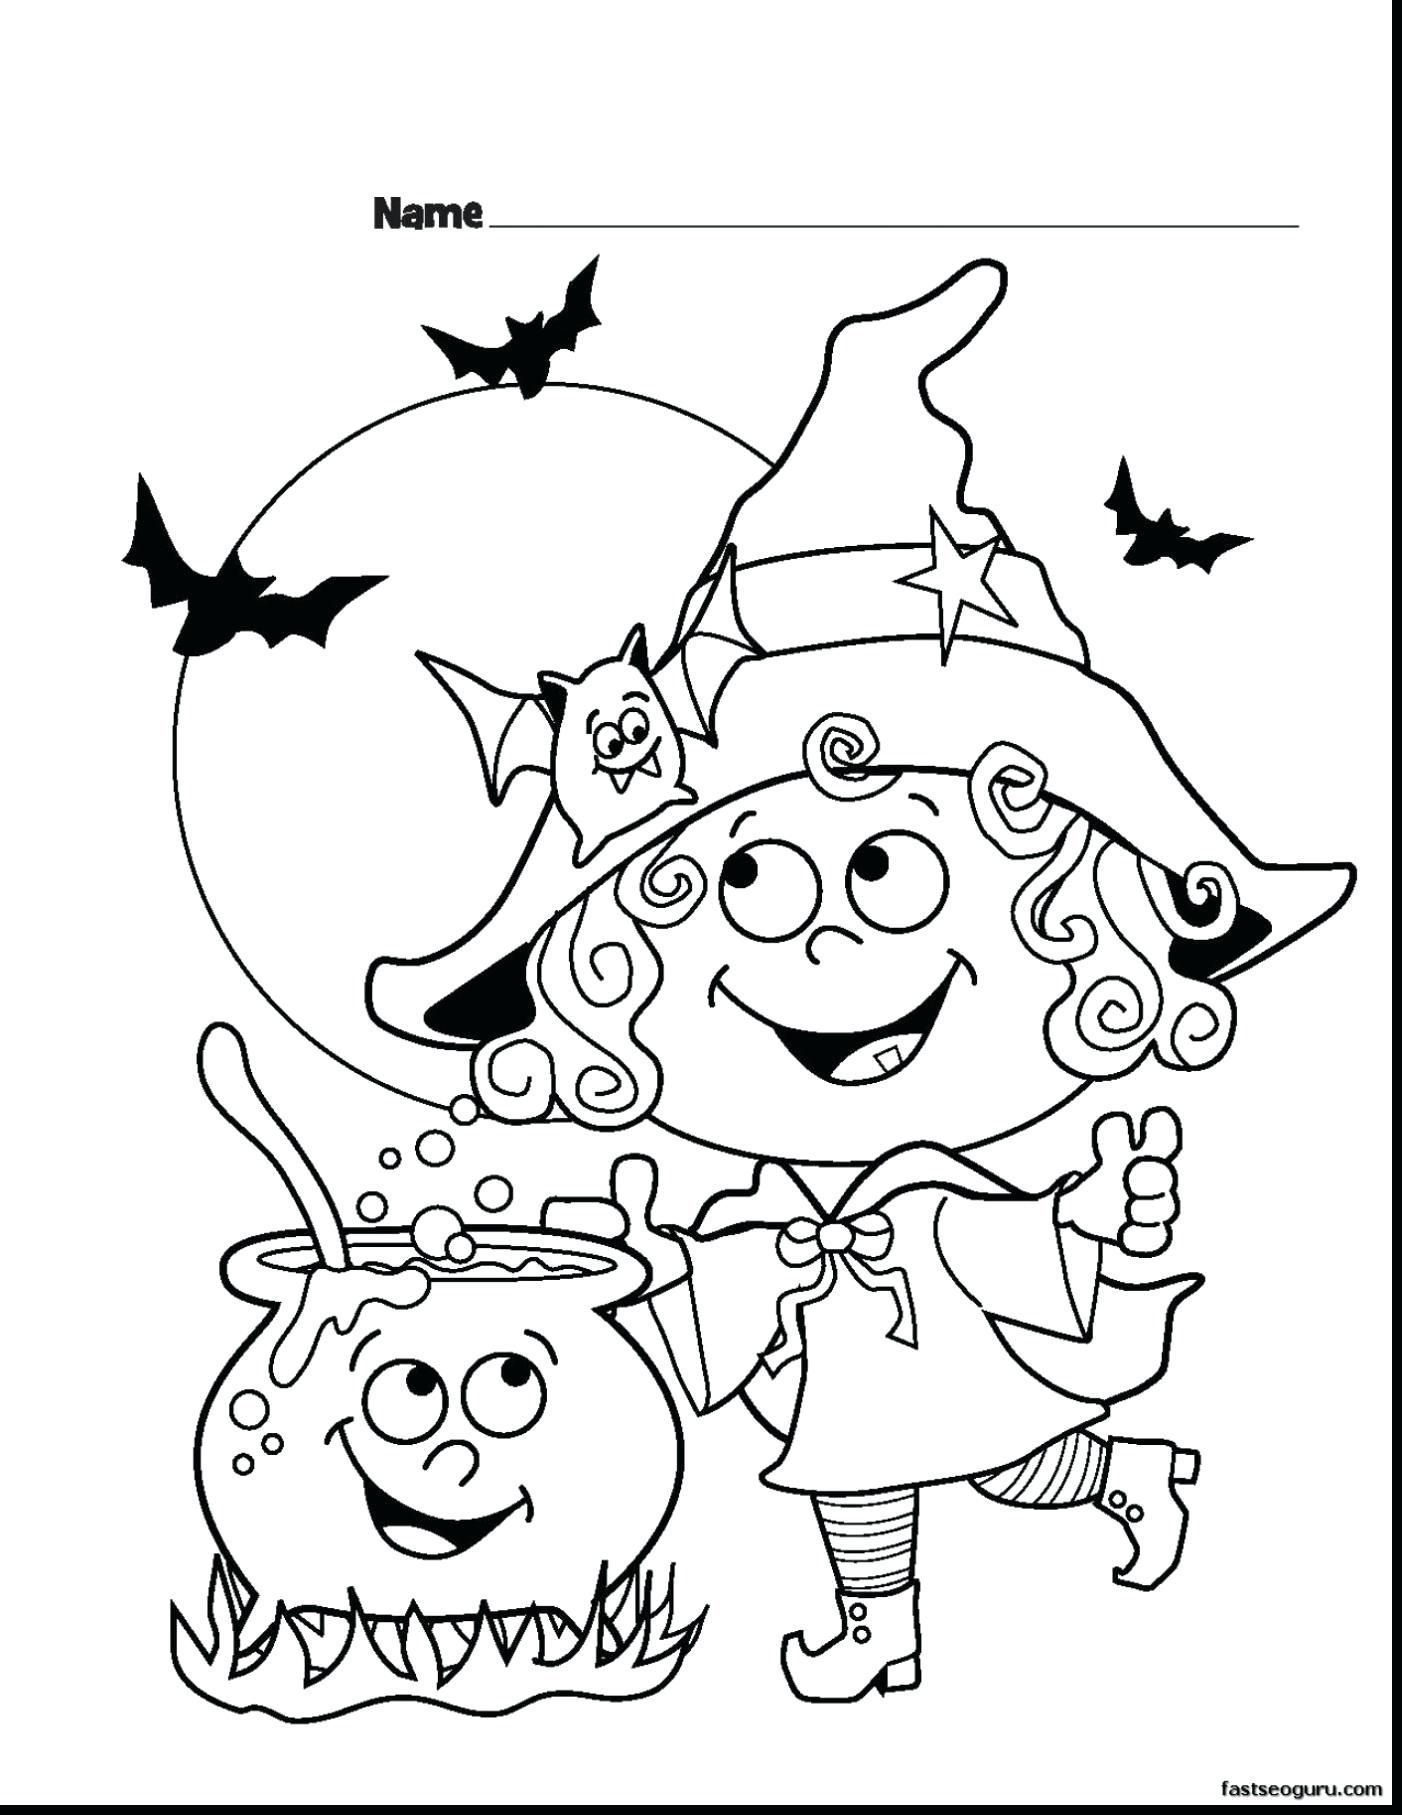 Printable Halloween Coloring Pages And Activities For Kids Free ...